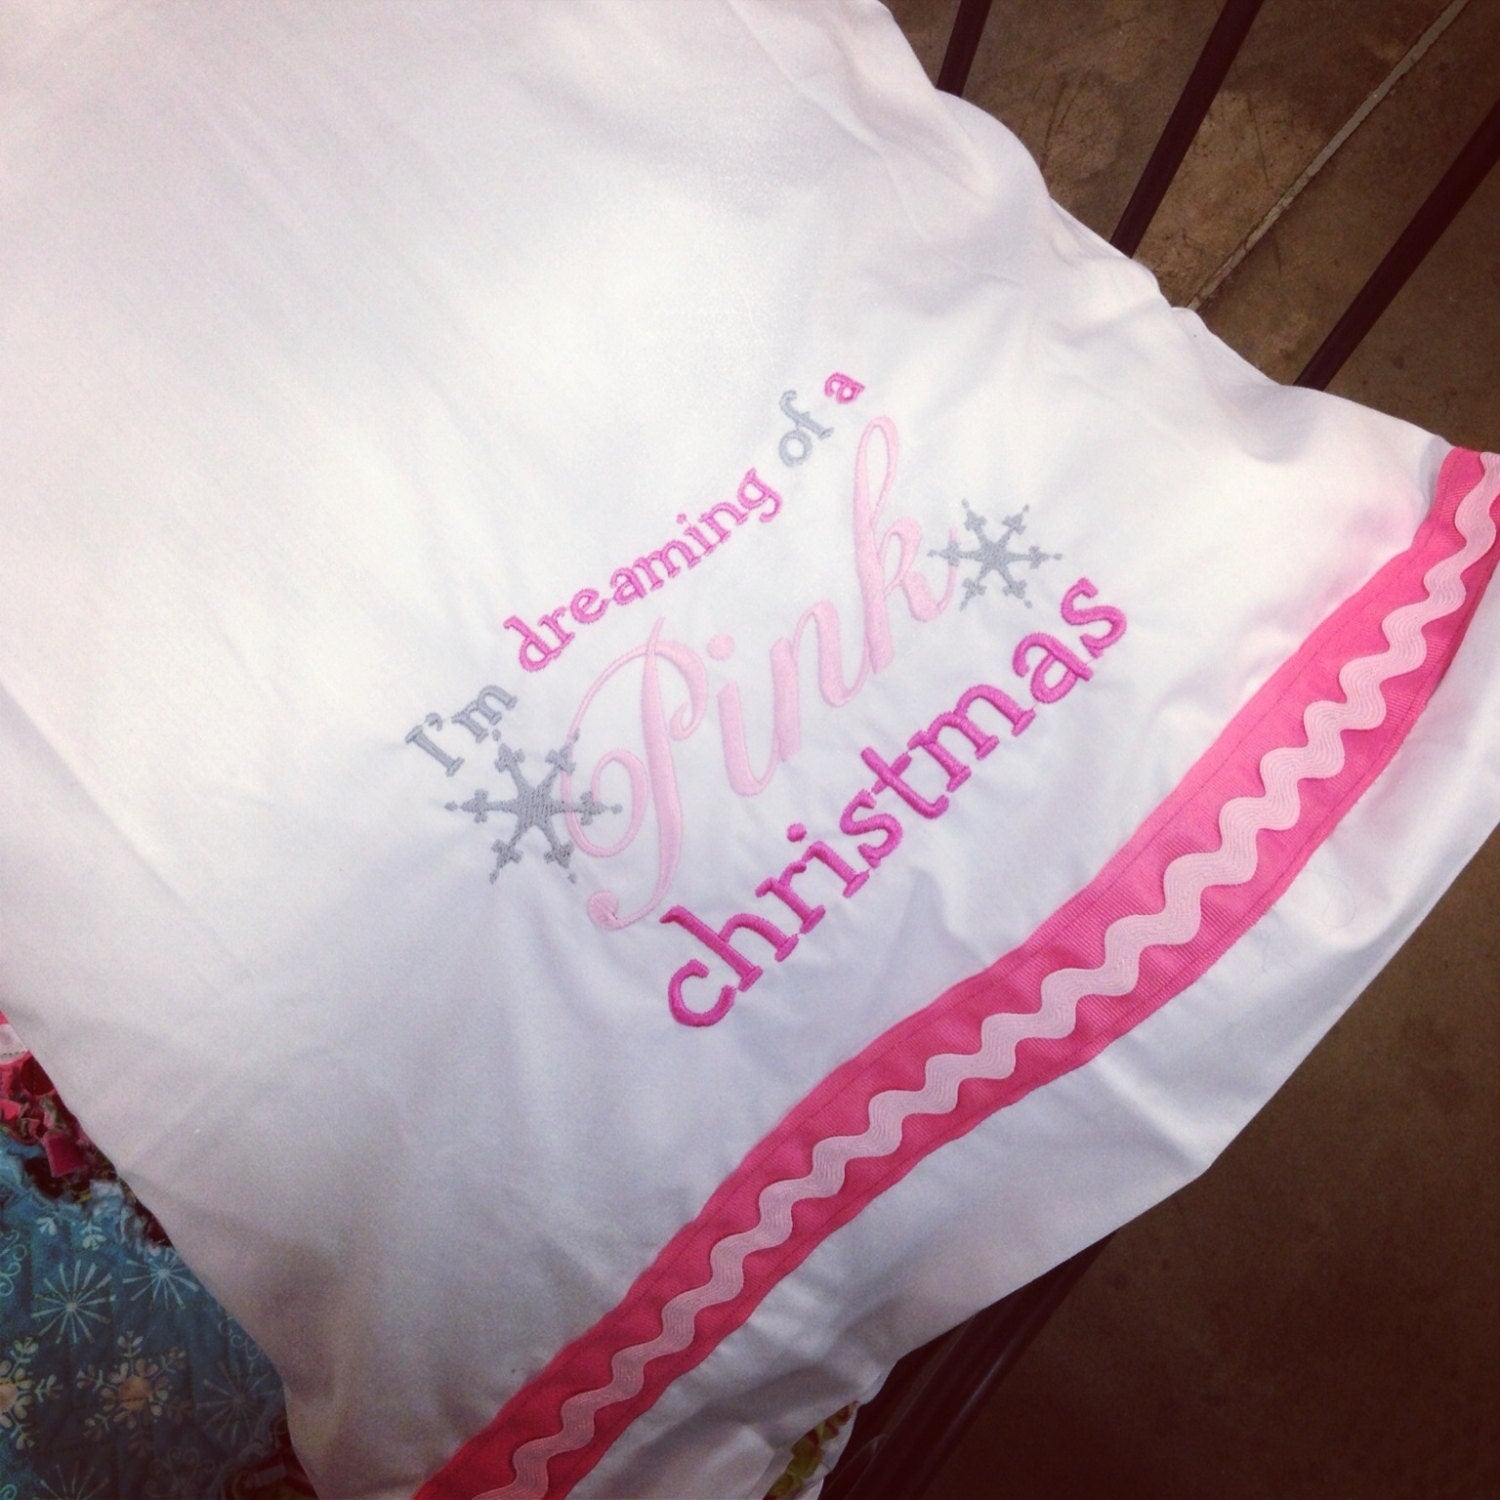 Dreaming of a Pink Christmas Pillowcase, Christmas Pillowcase, Girls Christmas Pillowcase, Night Before Christmas Pillowcase